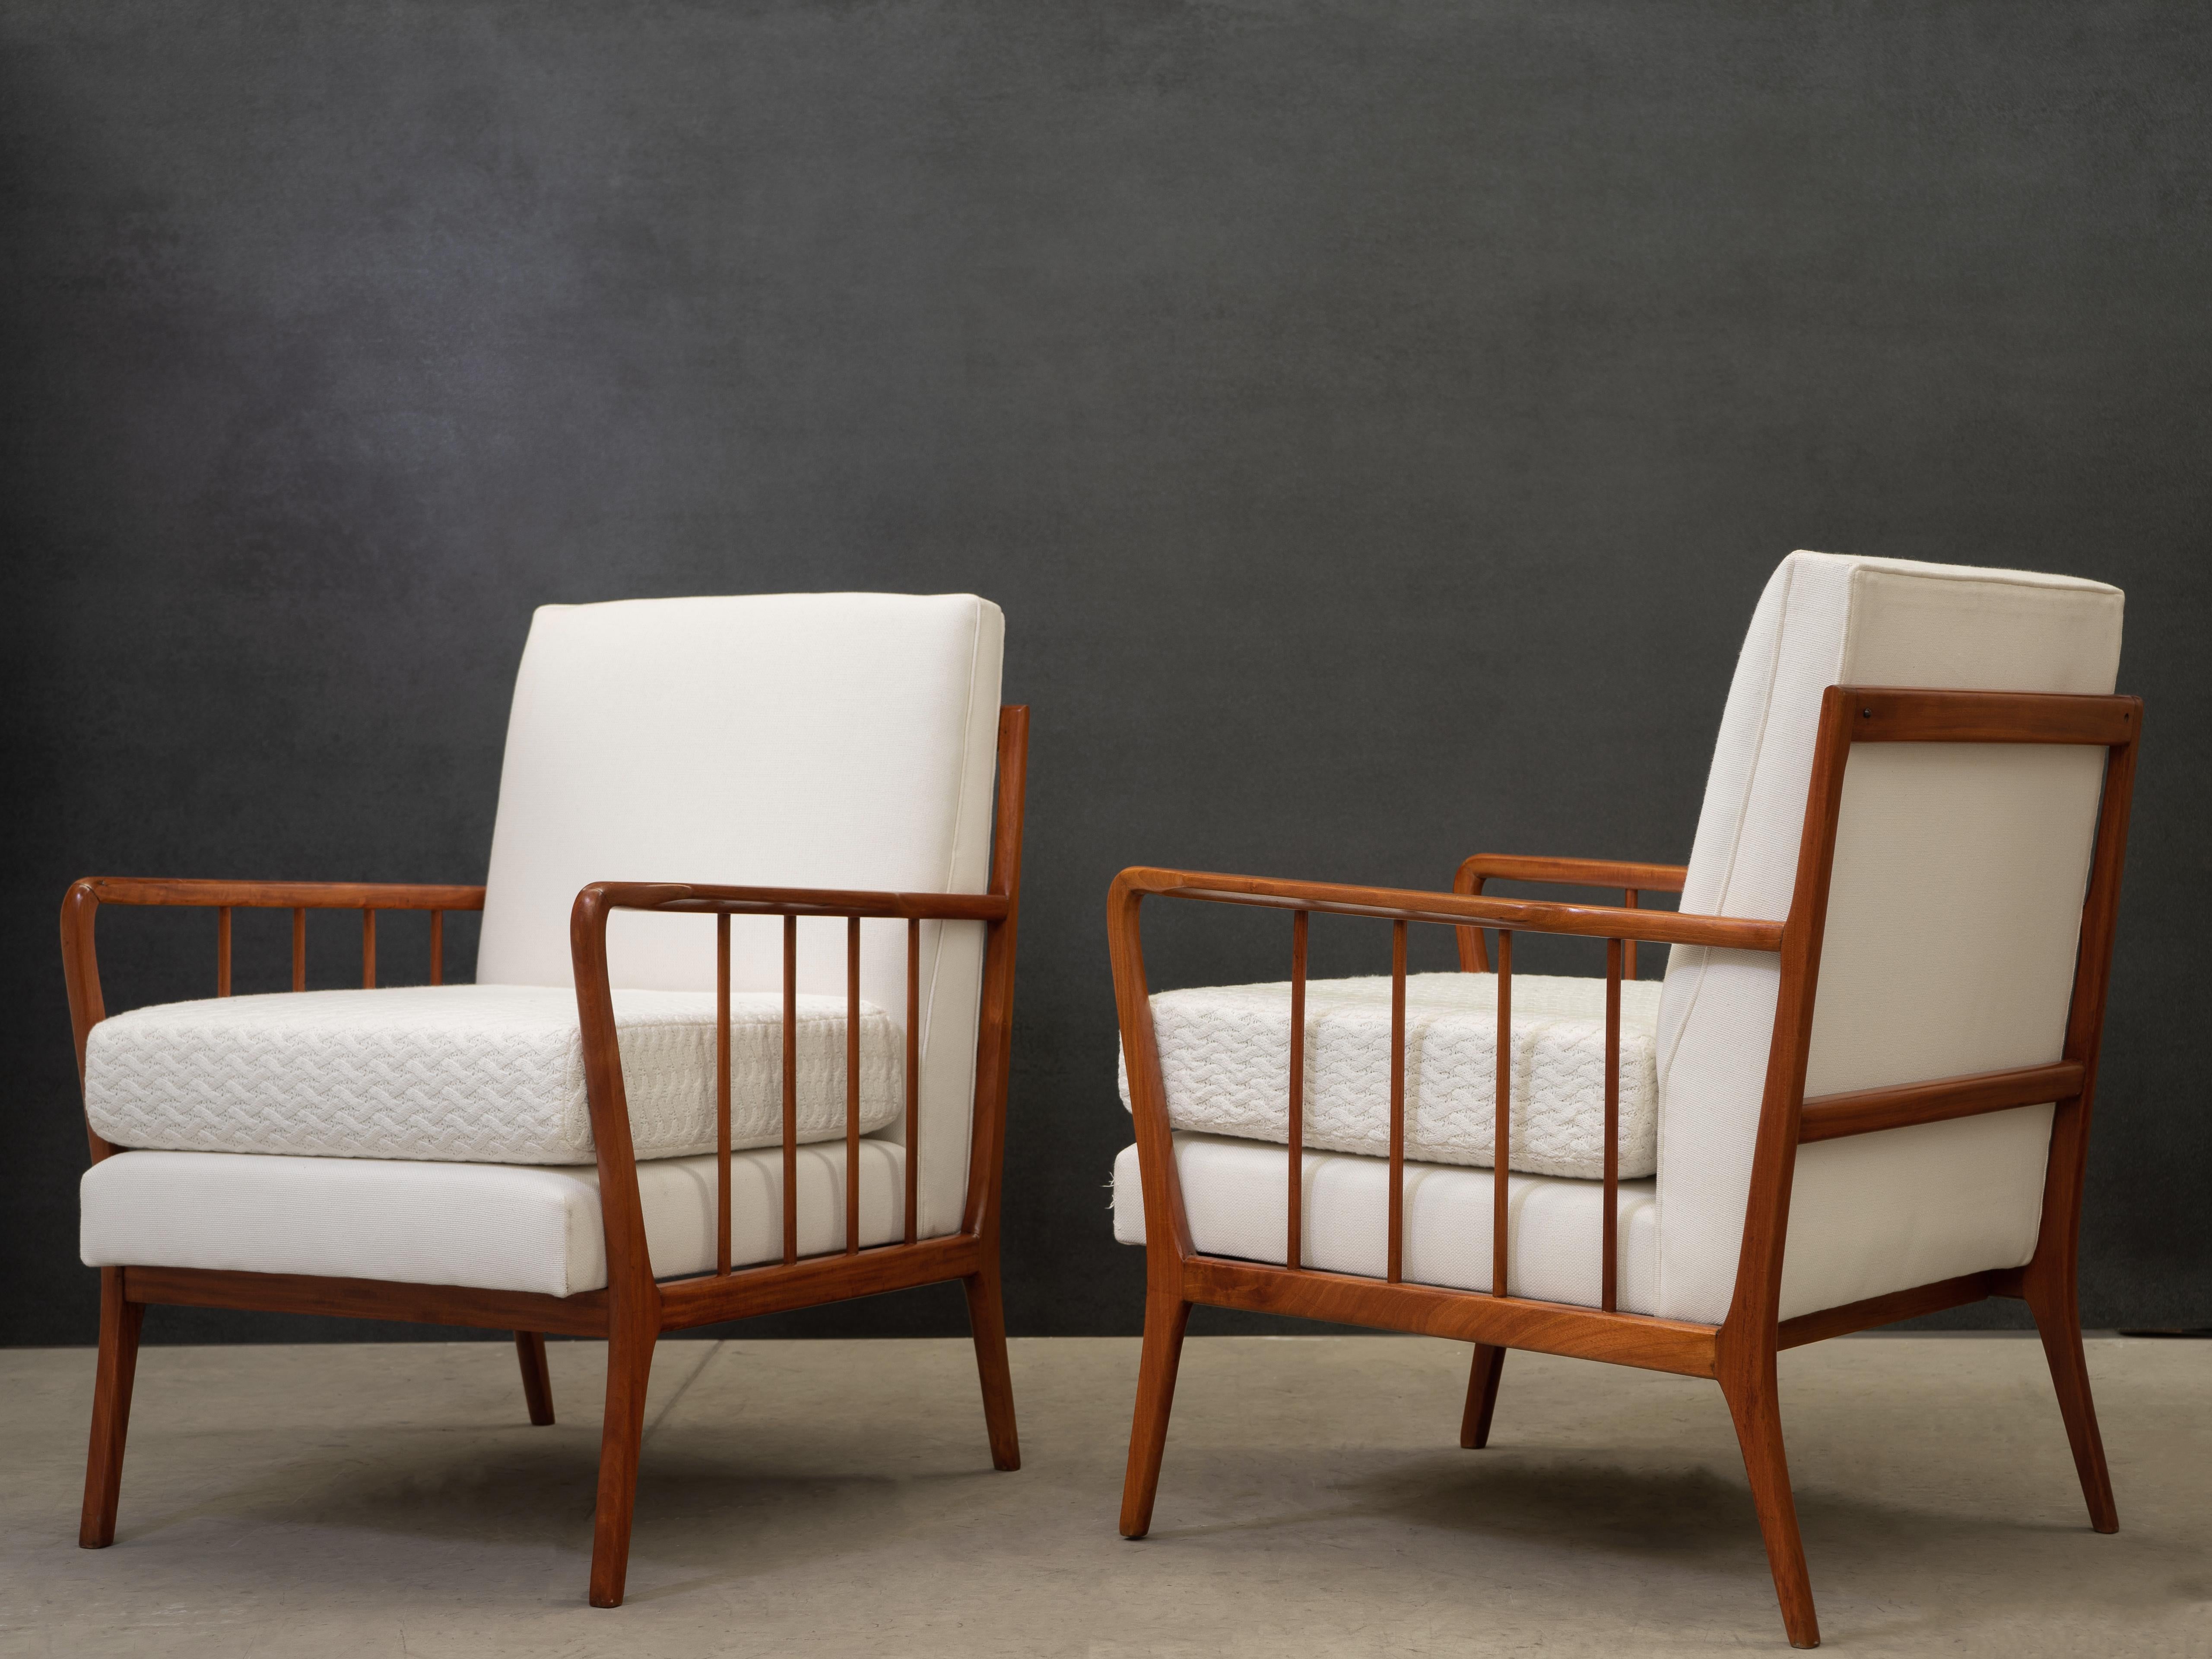 Designed by Rino Levi, the pair of armchairs its made of caviuna wood, a type of Jacaranda Rosewood. The chair has a unique manufacturing stamp and recently upholstered in Fine white knitting wool and linen in the backrest.

The back structure has